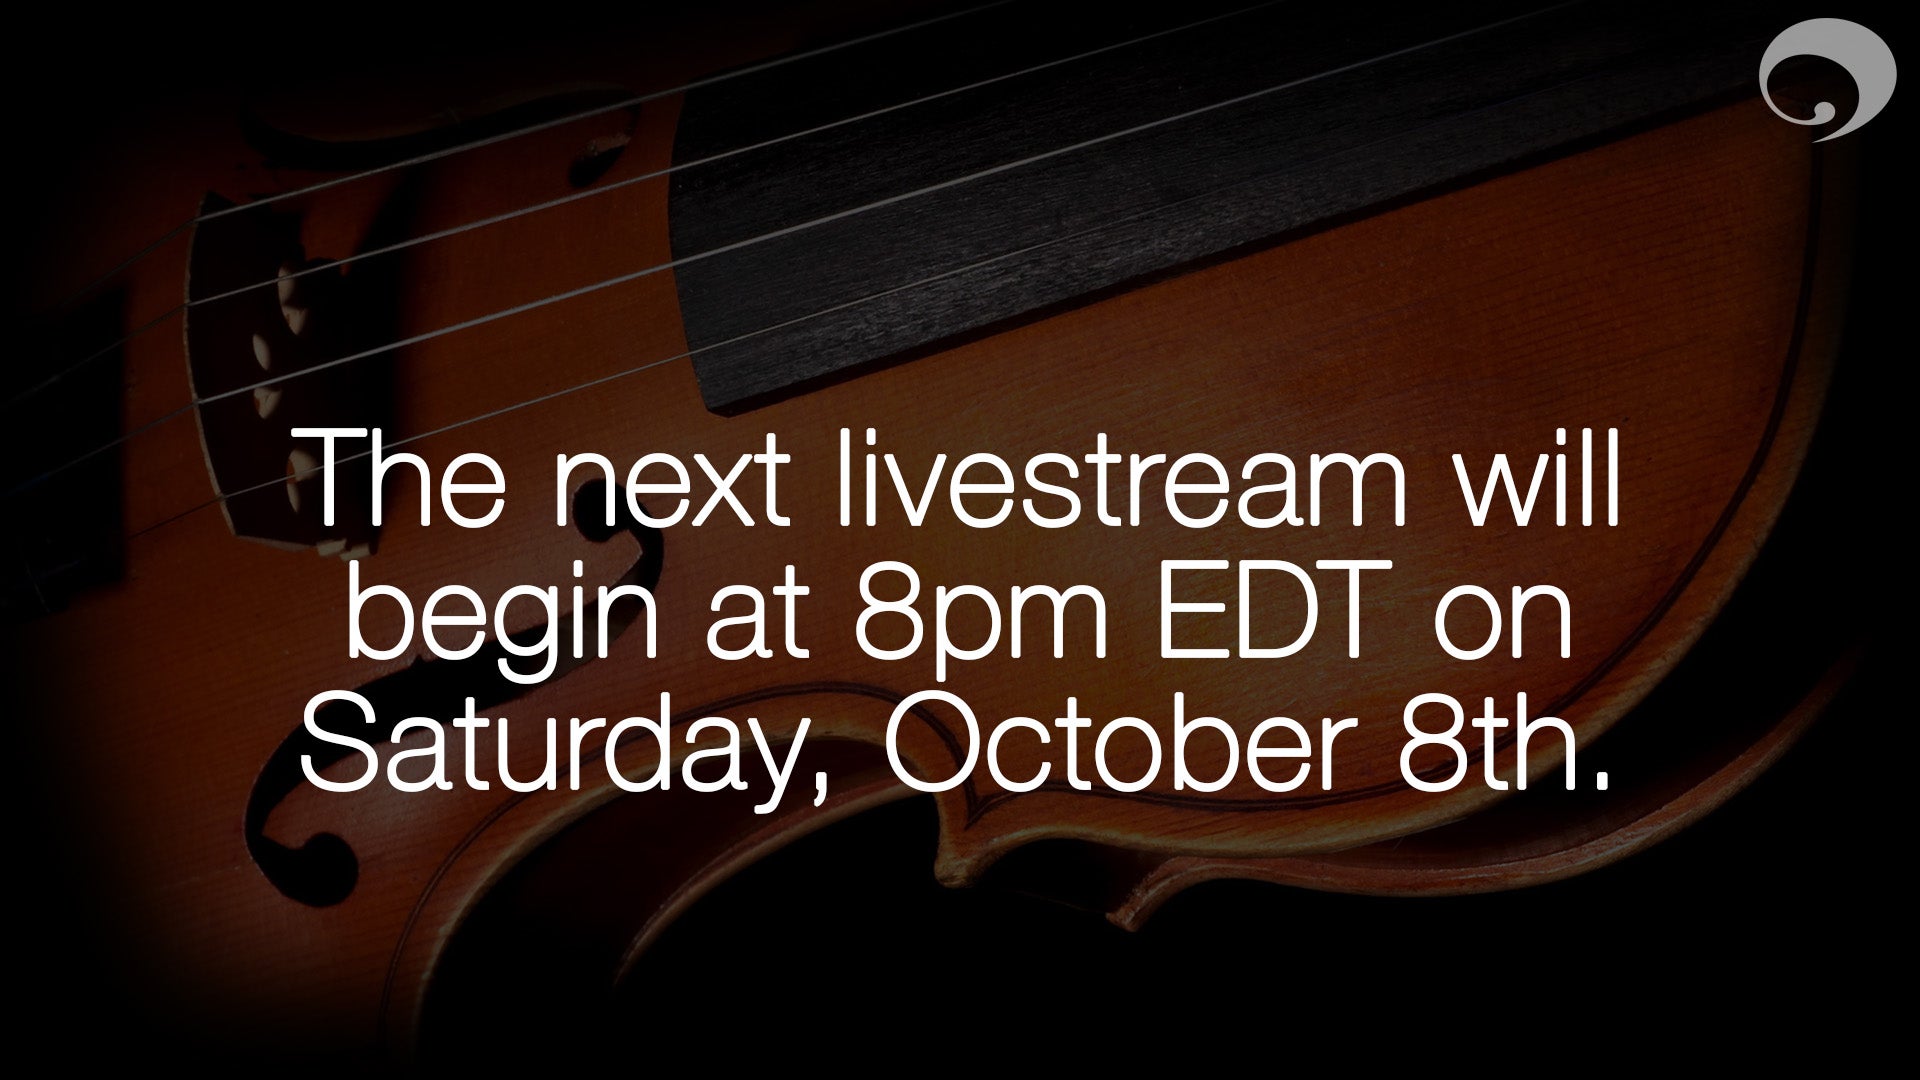 The next livestream will begin at 8pm EDT on Saturday, October 8, 2022